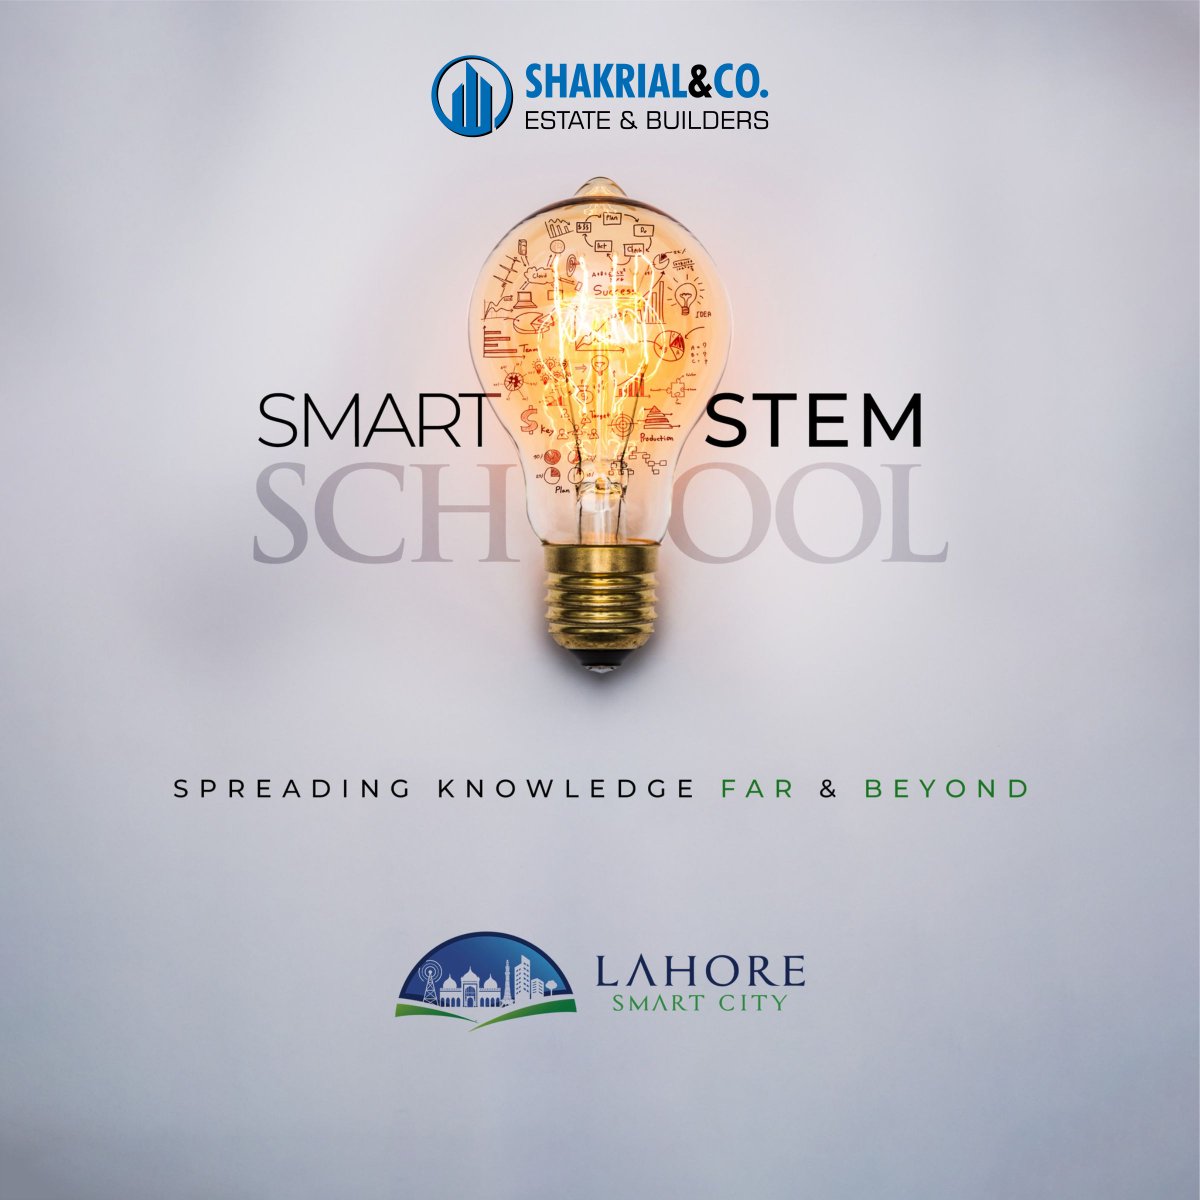 'Fueling Tomorrow's Brilliance: Igniting Curiosity and Empowering Minds with Cutting-Edge STEM Programs'

#shakrialandco #shakrial #shakrialandcoestateandbuilders #shakrialco #SmartCity #islamabad #SmartSTEMSchool #SmartEducation #EducationDistrict #LahoreSmartCity